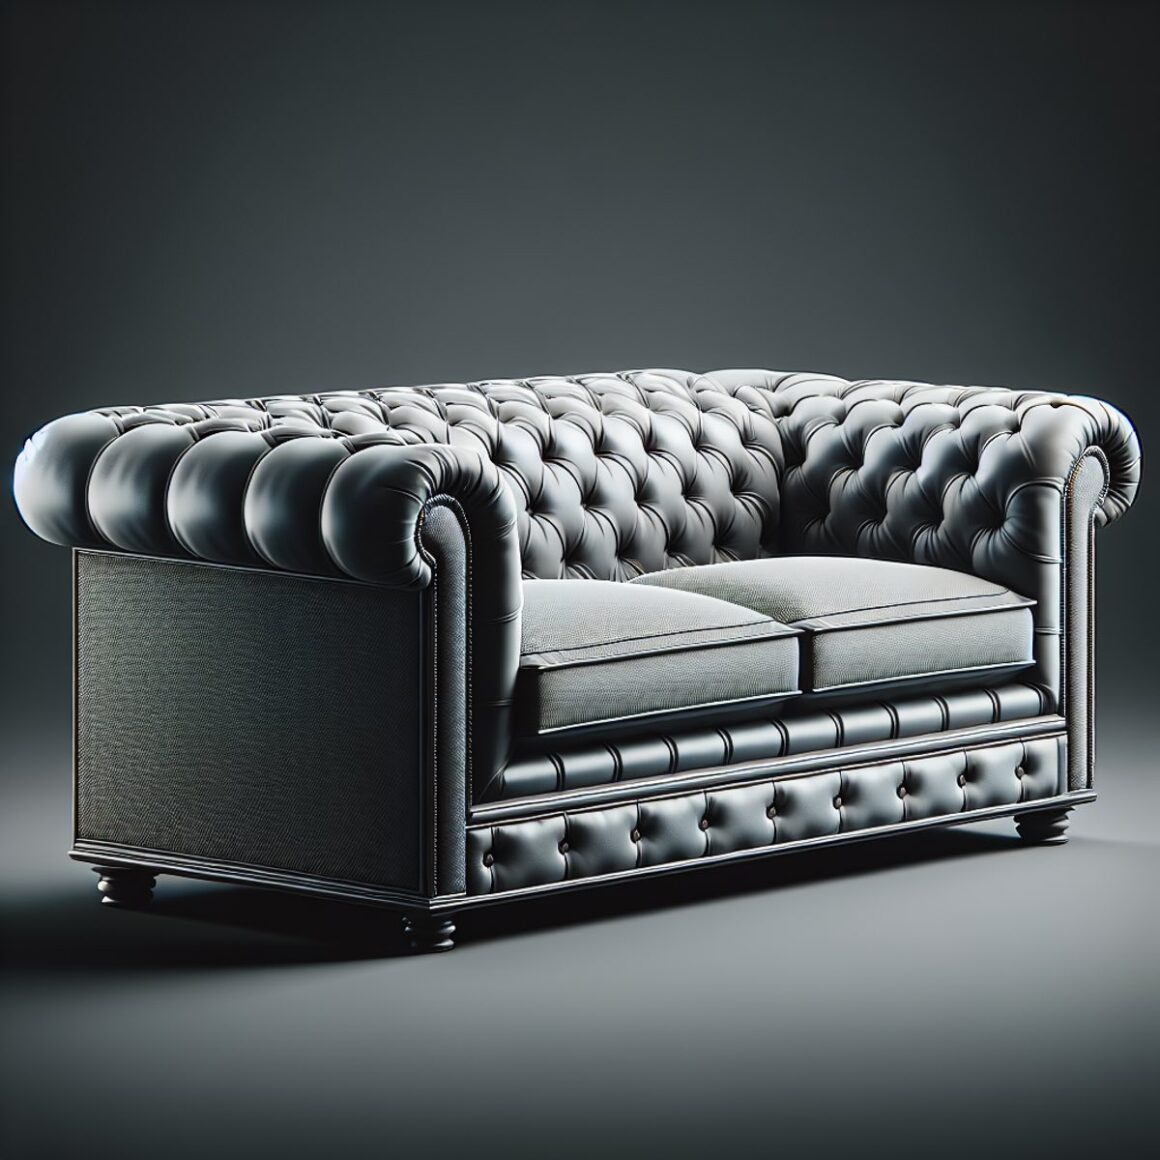 A traditional Chesterfield sofa with soft cushions and a sturdy frame, exuding timeless elegance and sophistication.